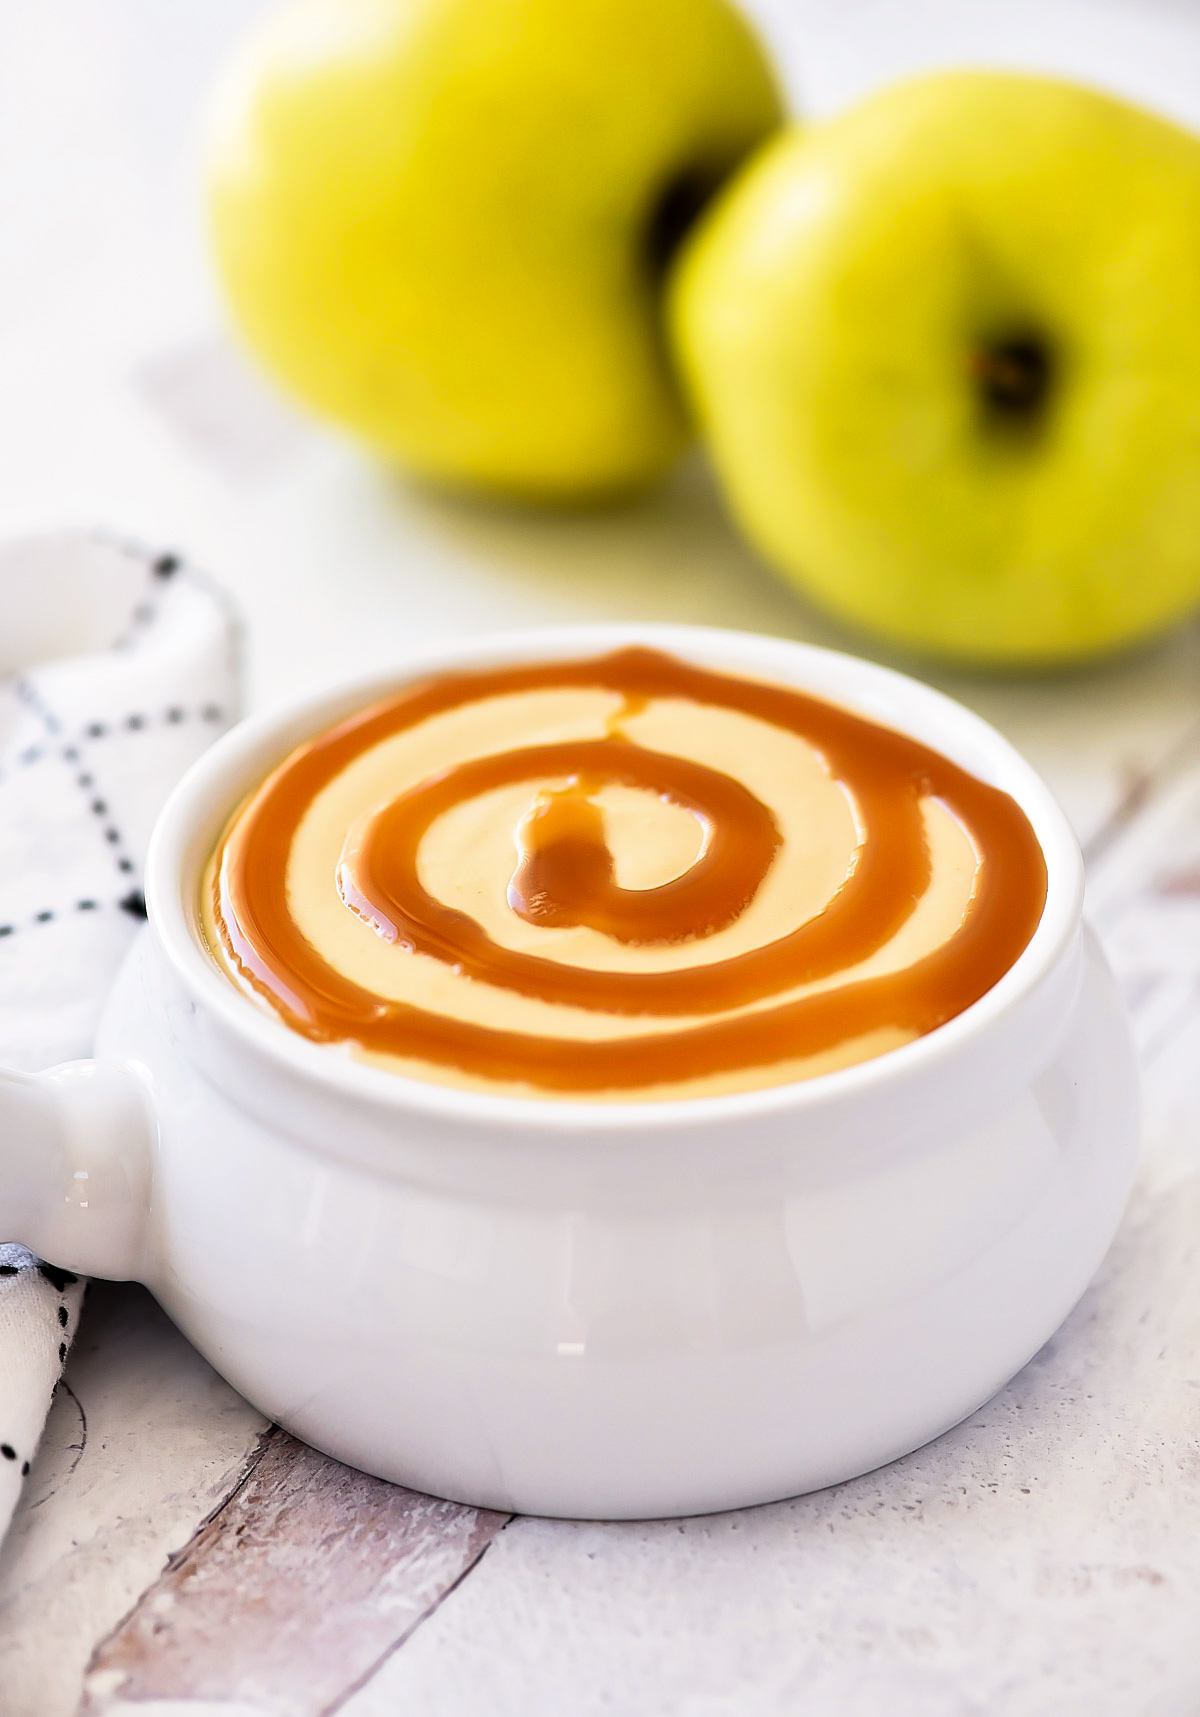 Caramel Apple Dip is a creamy dip that tastes just like a classic caramel apple. Life-in-the-Lofthouse.com